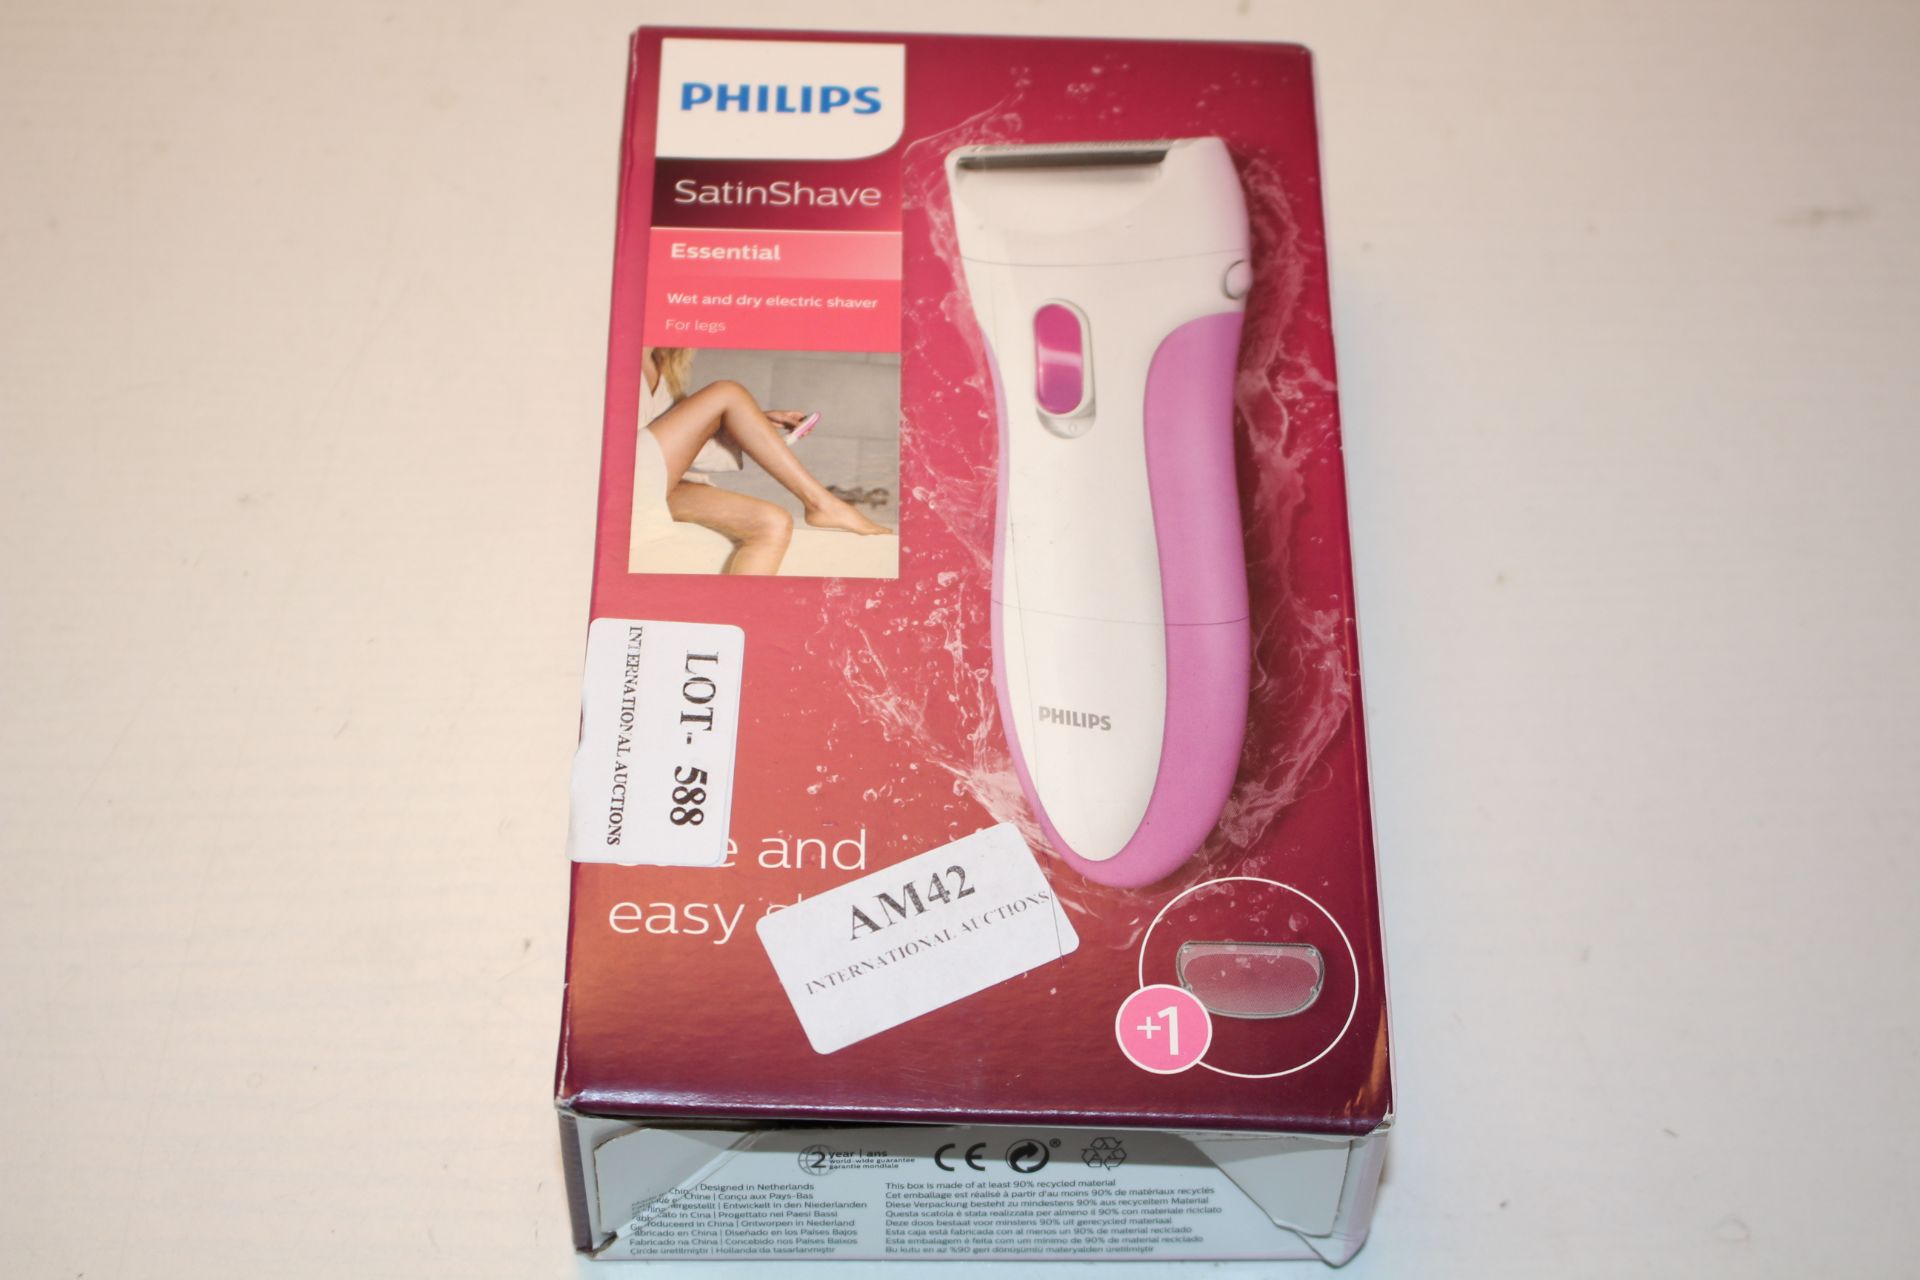 BOXED PHILIPS SATINSHAVE ESSENTIAL WET & DRY ELECTRIC SHAVER RRP £39.99Condition ReportAppraisal